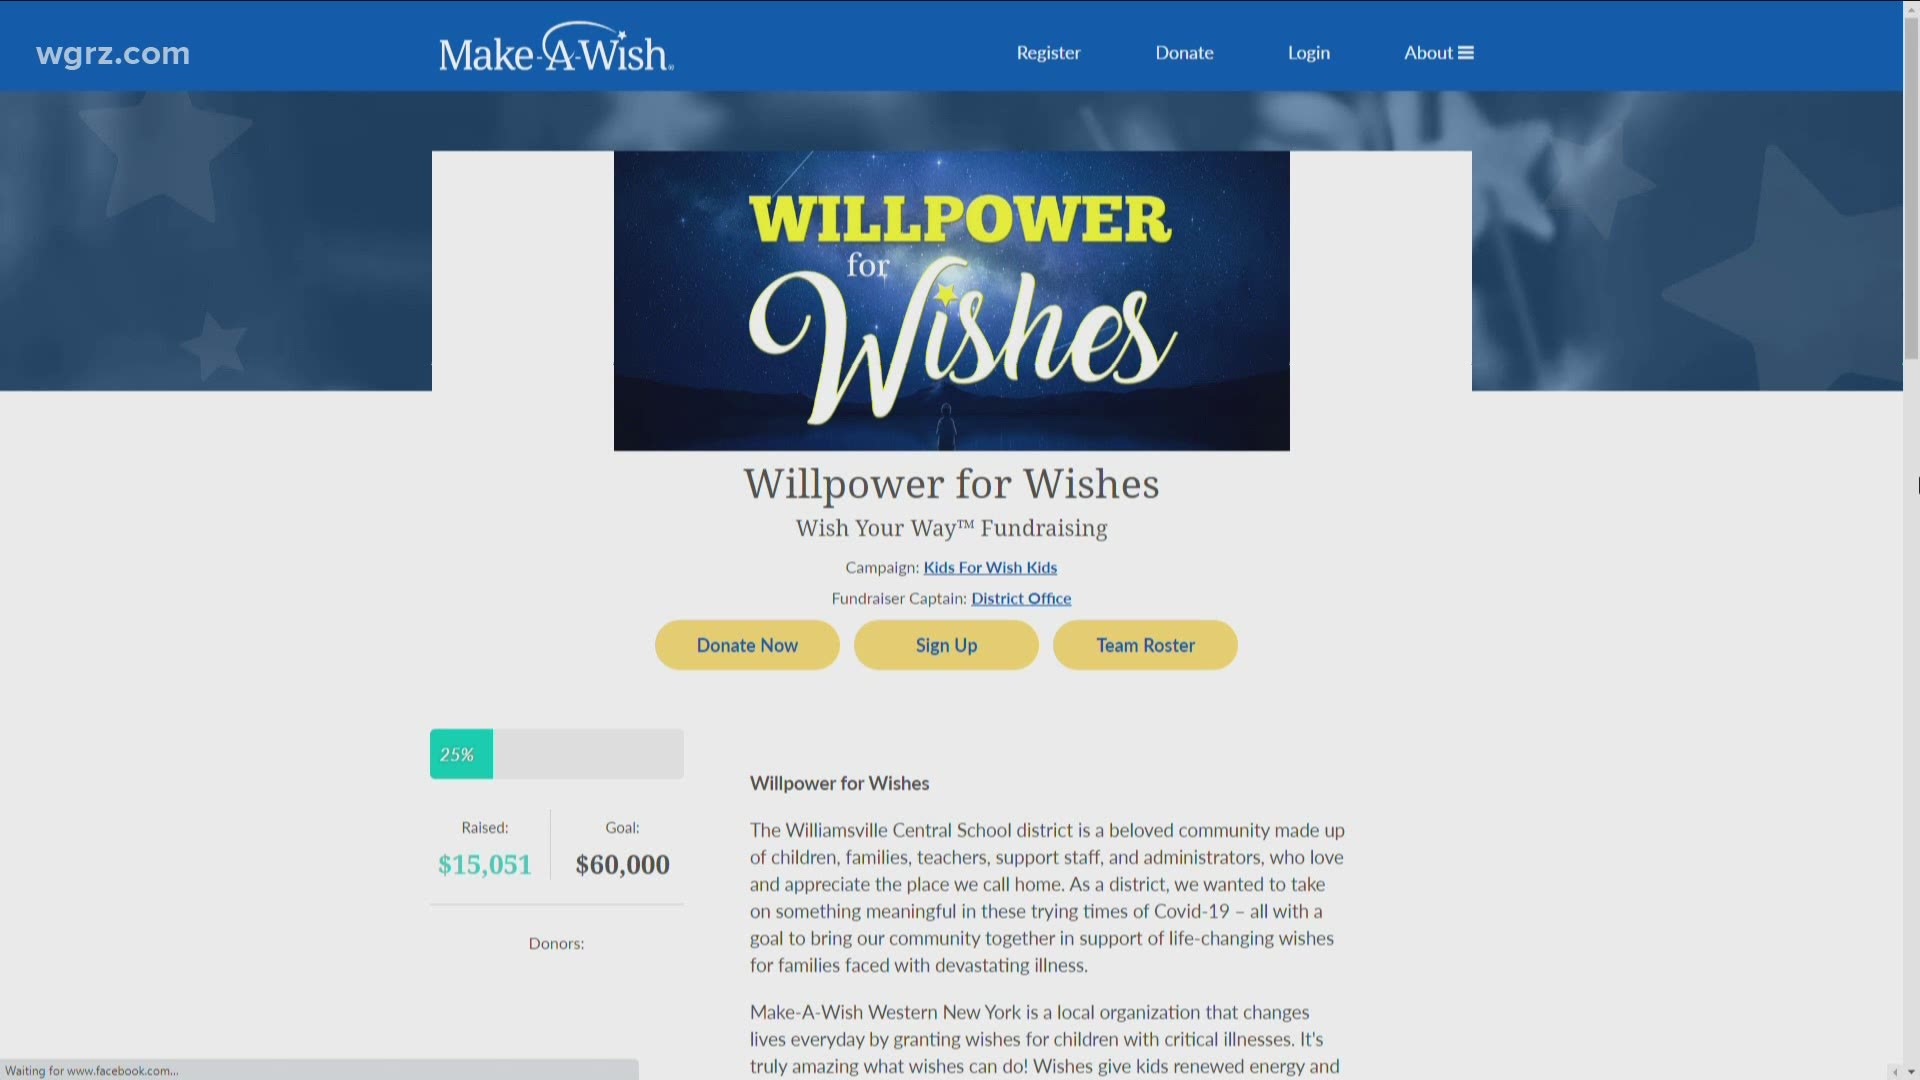 Each Williamsville school is organizing and its own fundraisers as part of the "Willpower for Wishes" campaign, which runs through World Wish Day on April 29th.